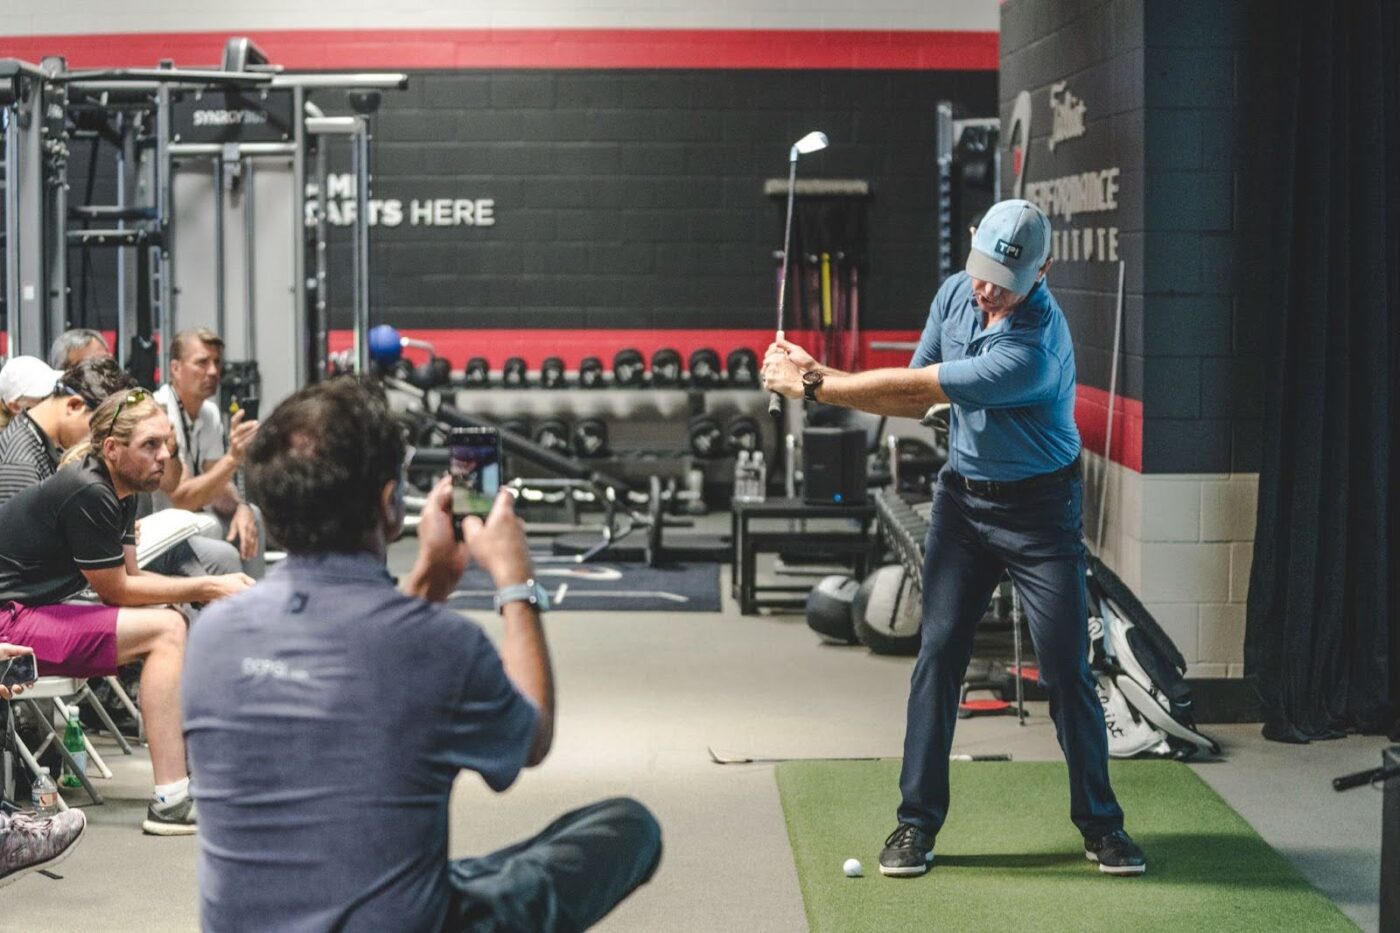 A participant takes a golf swing while physios capture the moment for analysis.